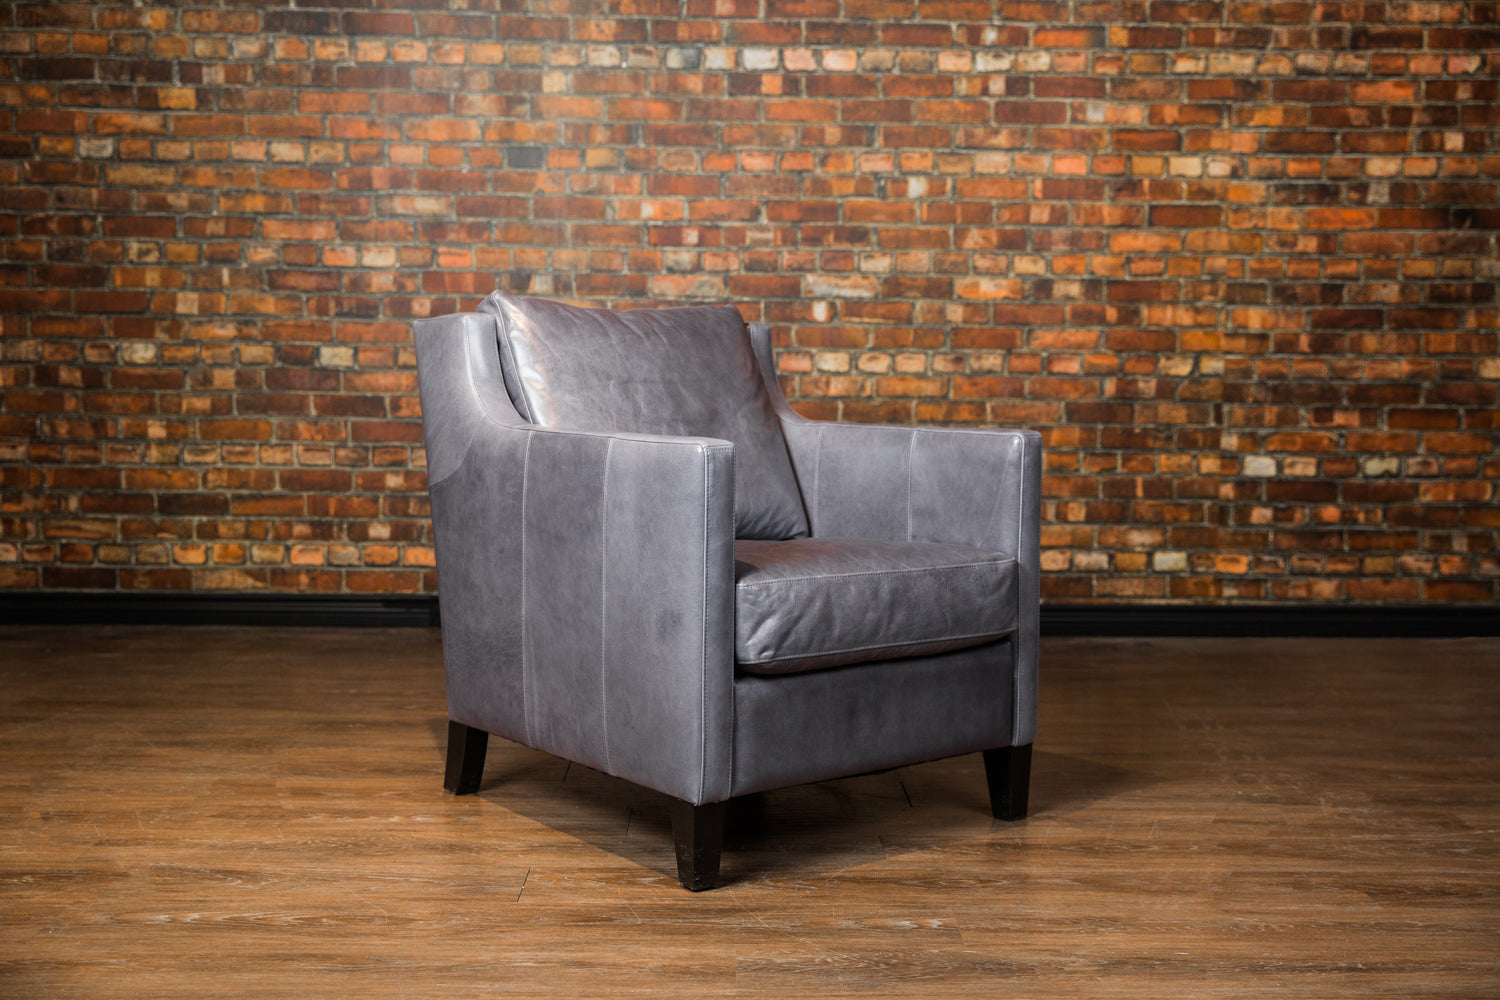 MANORWOOD PILLOW BACK LEATHER CHAIR